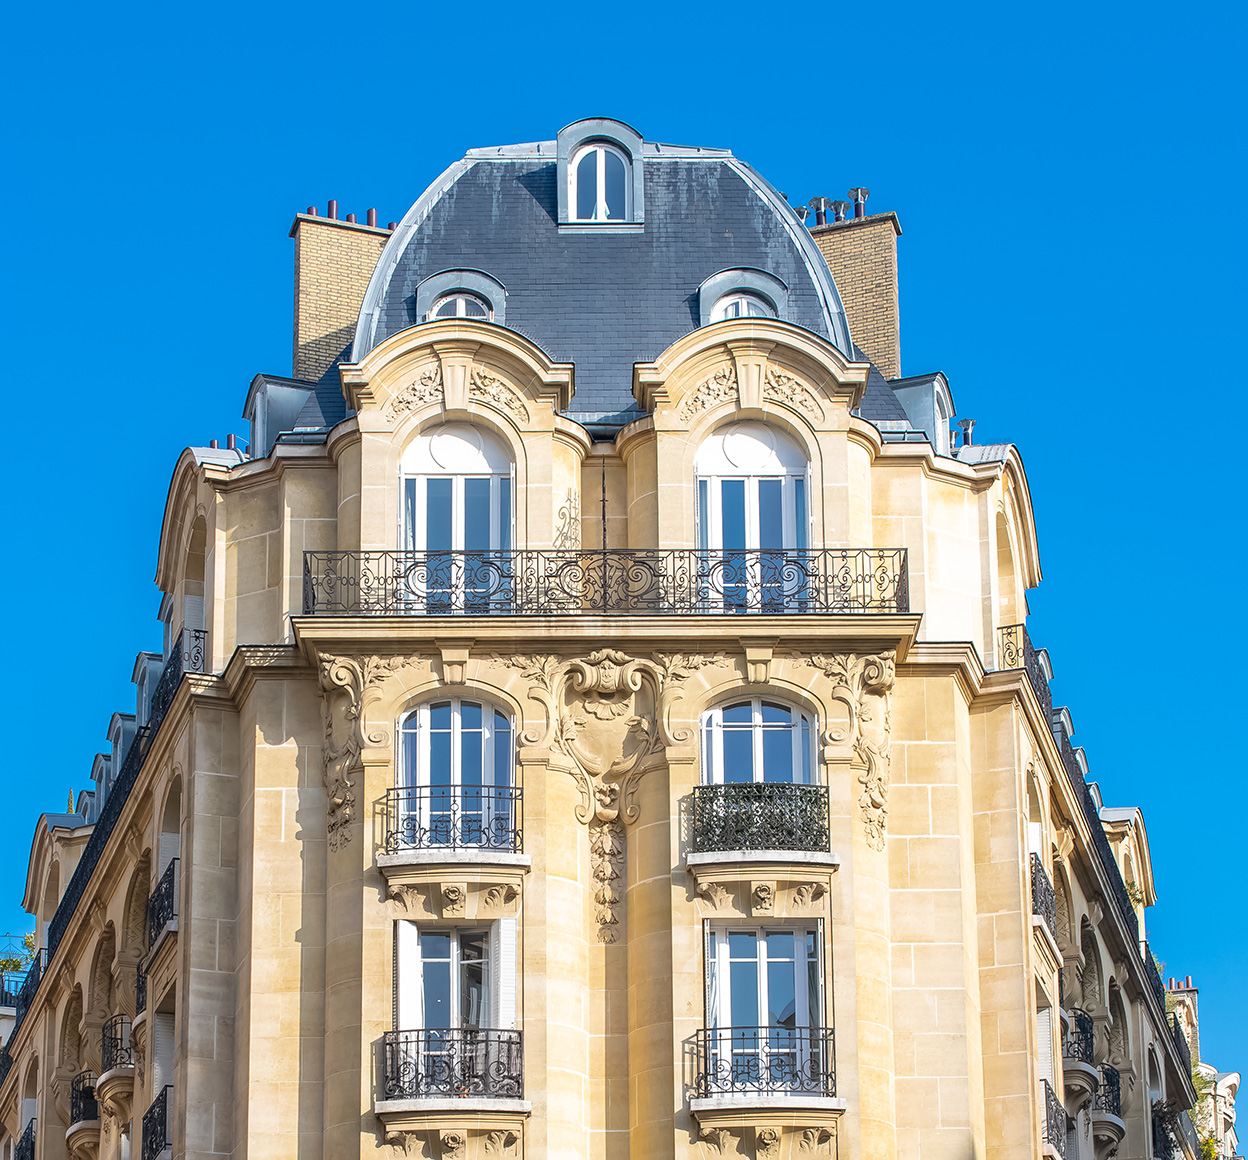 A low angle view of a typical historical stone building in Neuilly sur Seine, France, providing a sense of the scale and beauty of the architecture in the city.